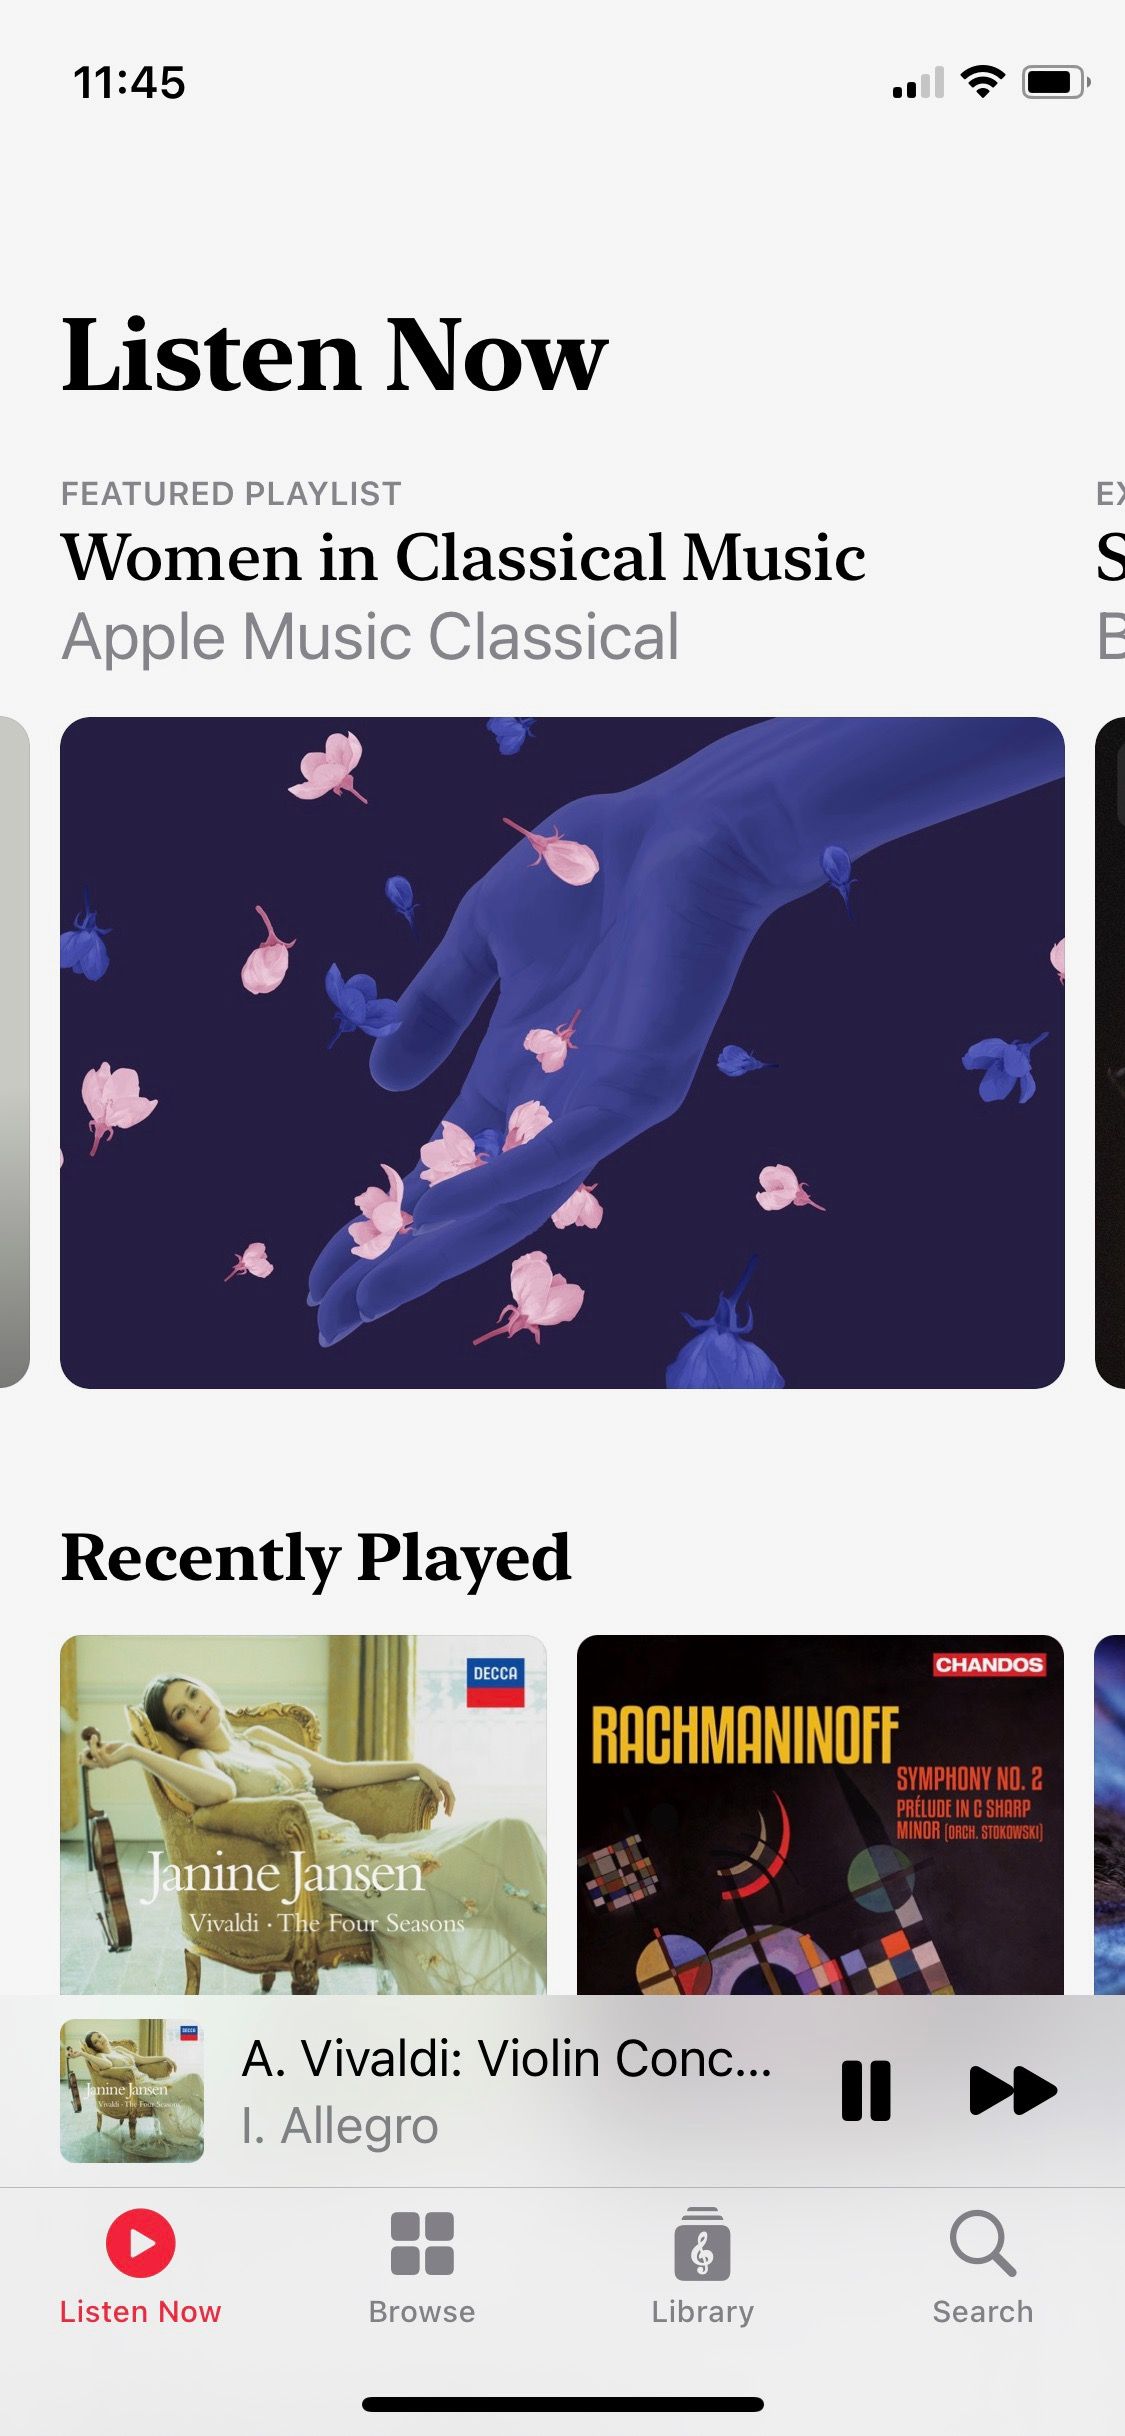 Screenshot of Apple Music Classical featured playlist